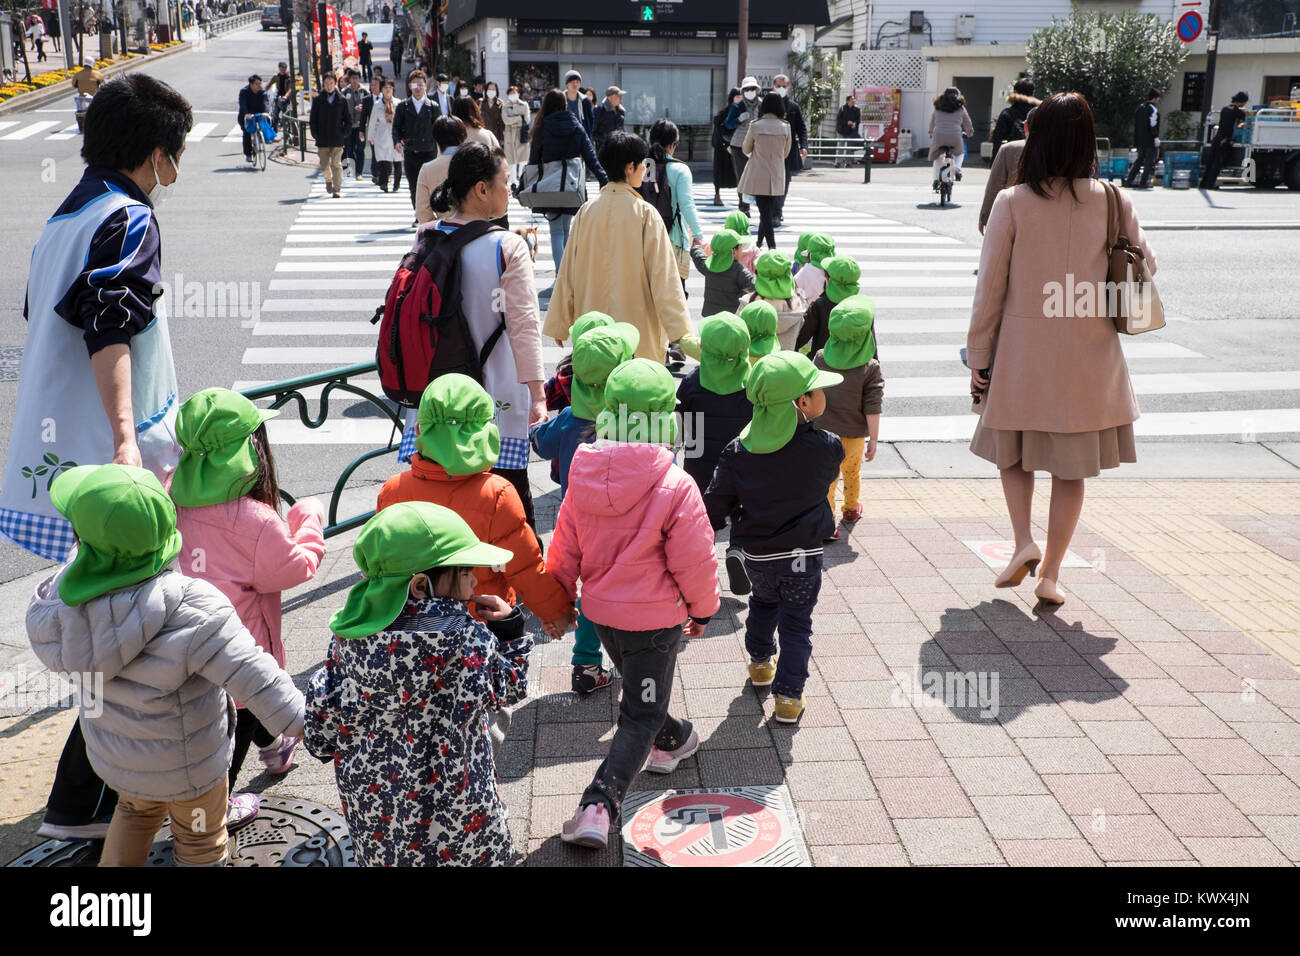 Japan, Tokyo, Honshu Island: group of children, pupils with a green cap, in a street Stock Photo